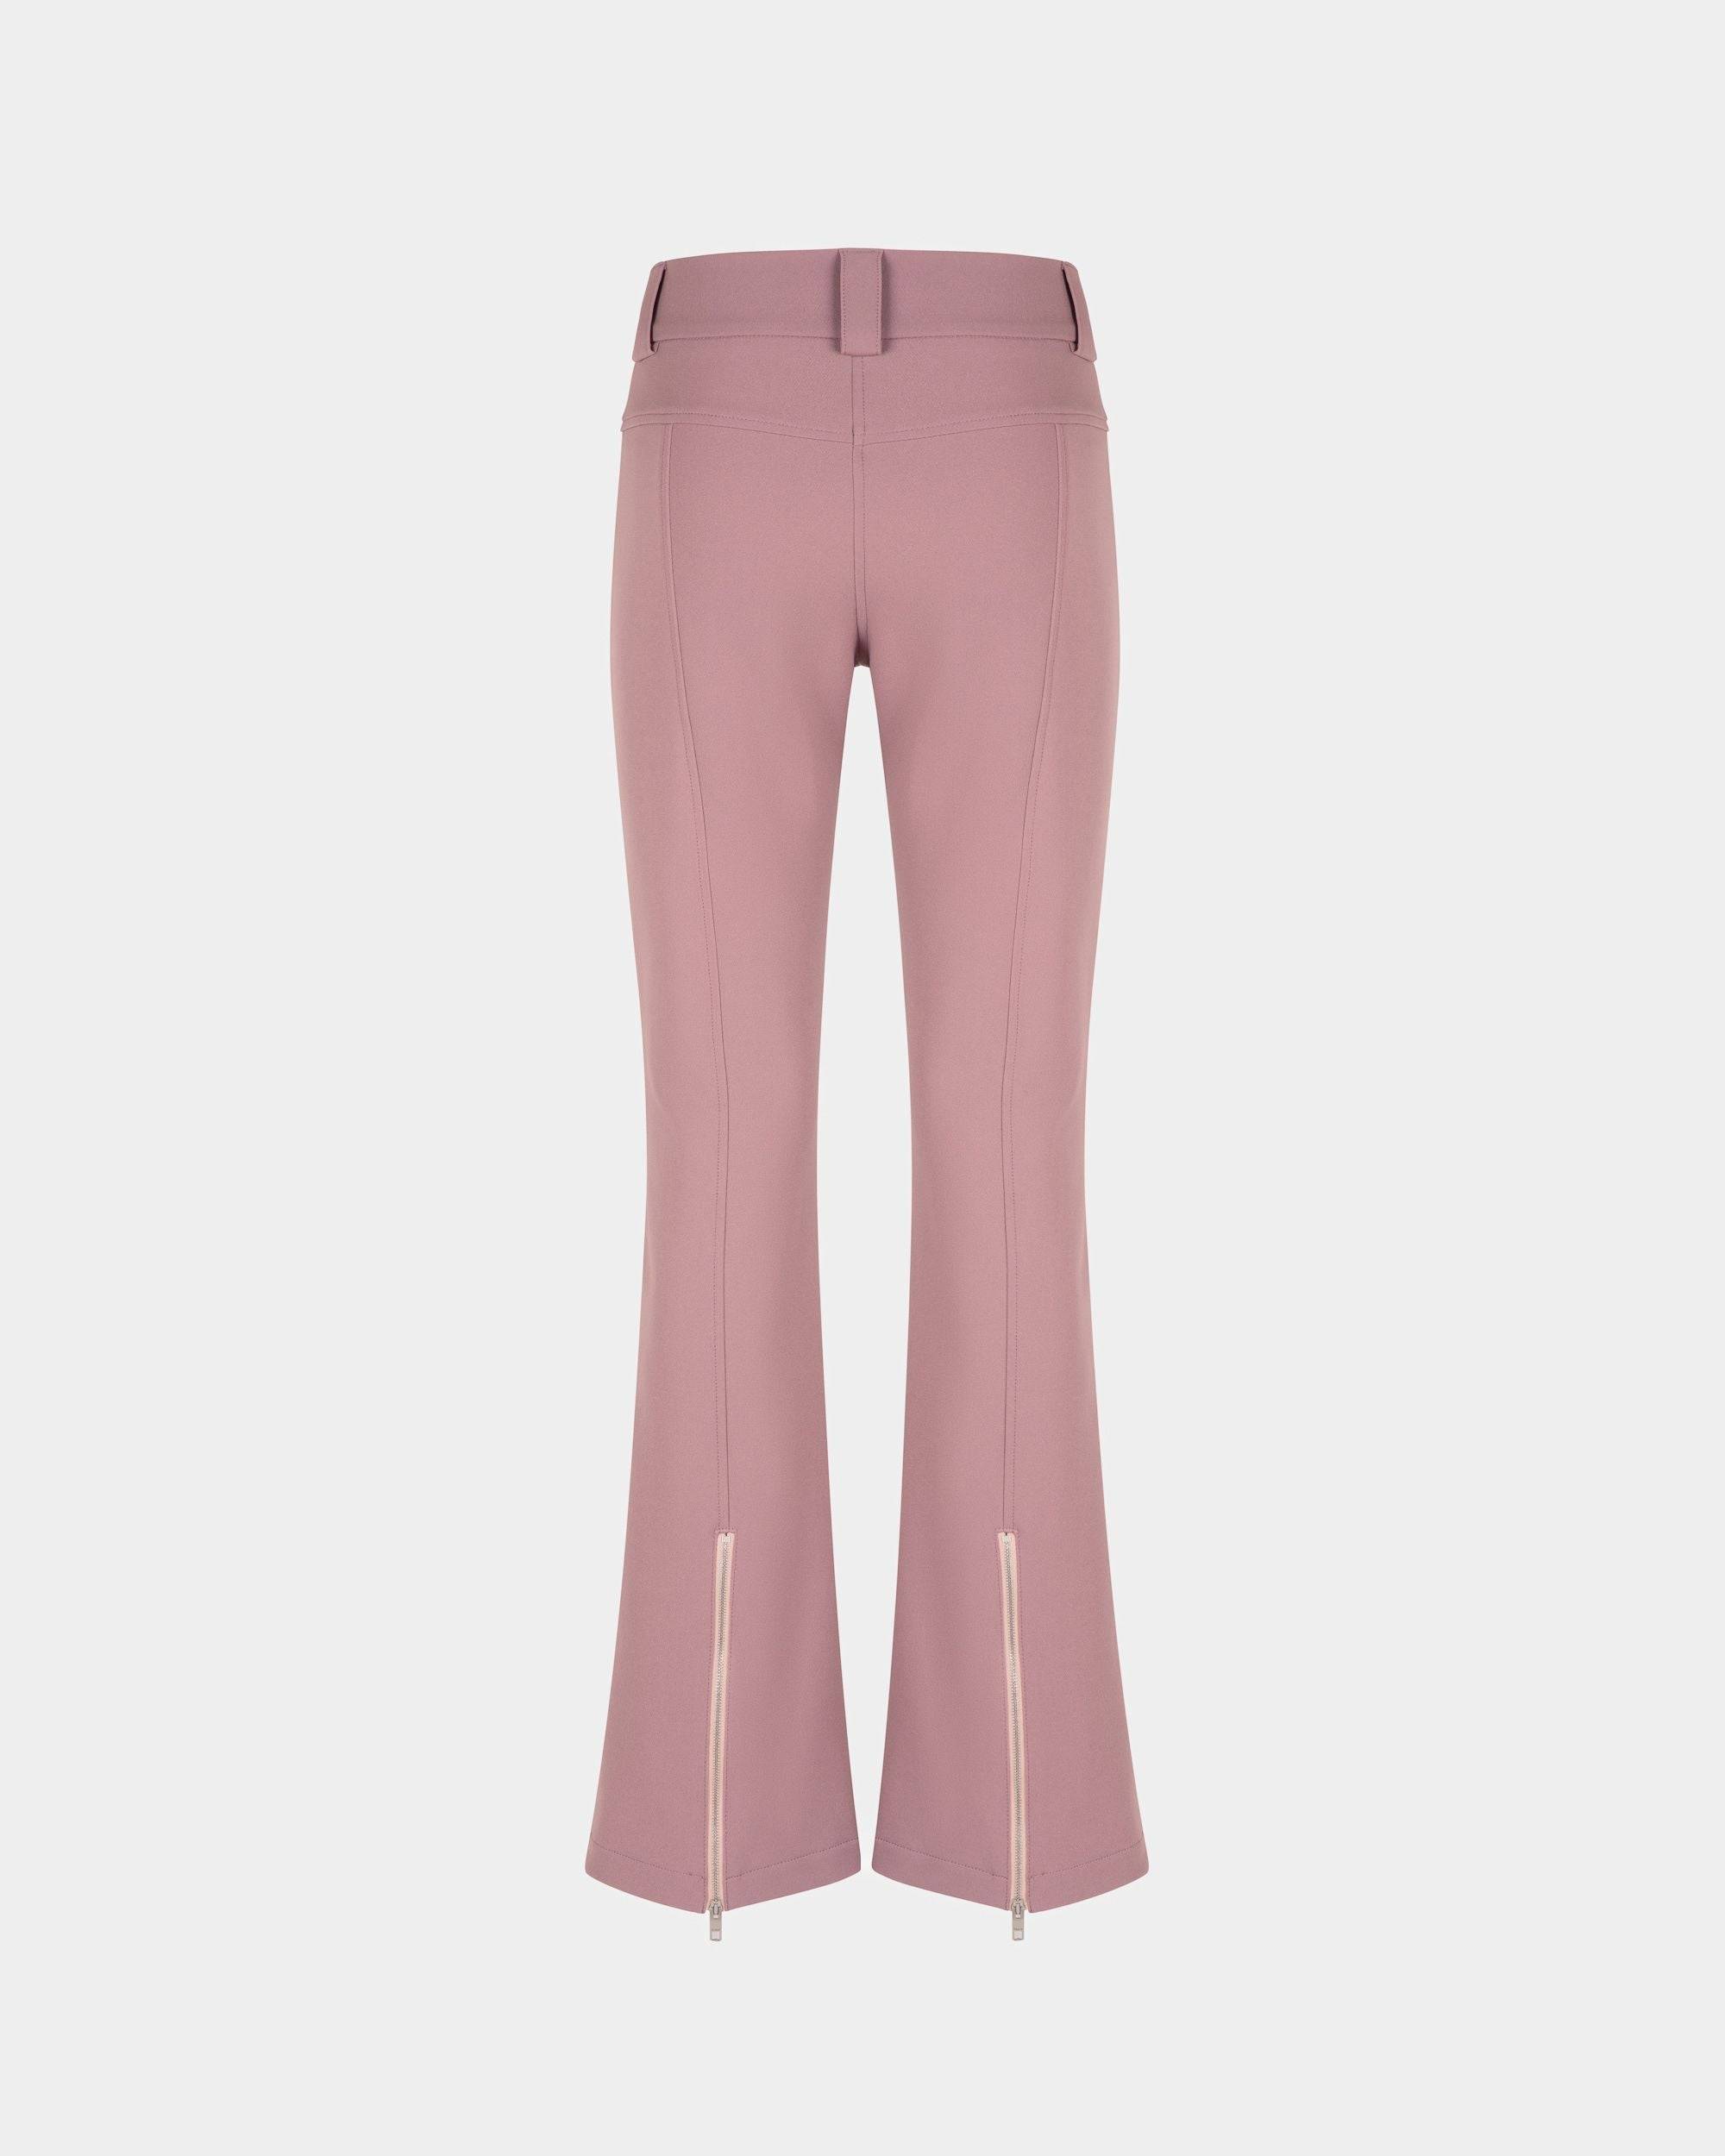 Women's Flared Stretch Pants in Light Pink  | Bally | Still Life Back